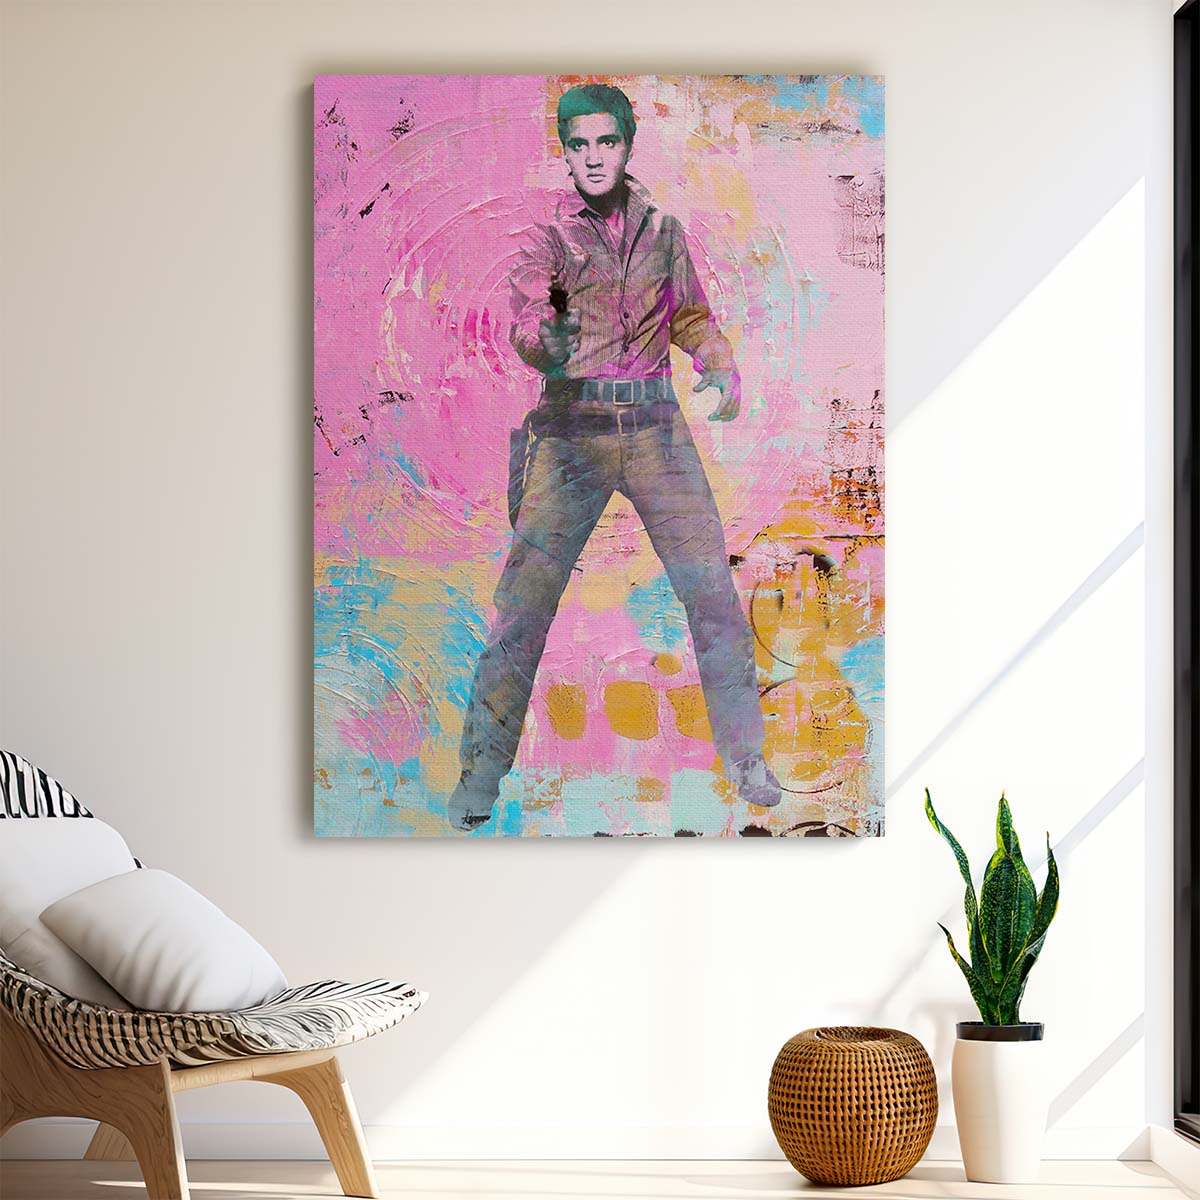 Elvis Presley Circles Pink Graffiti Wall Art by Luxuriance Designs. Made in USA.